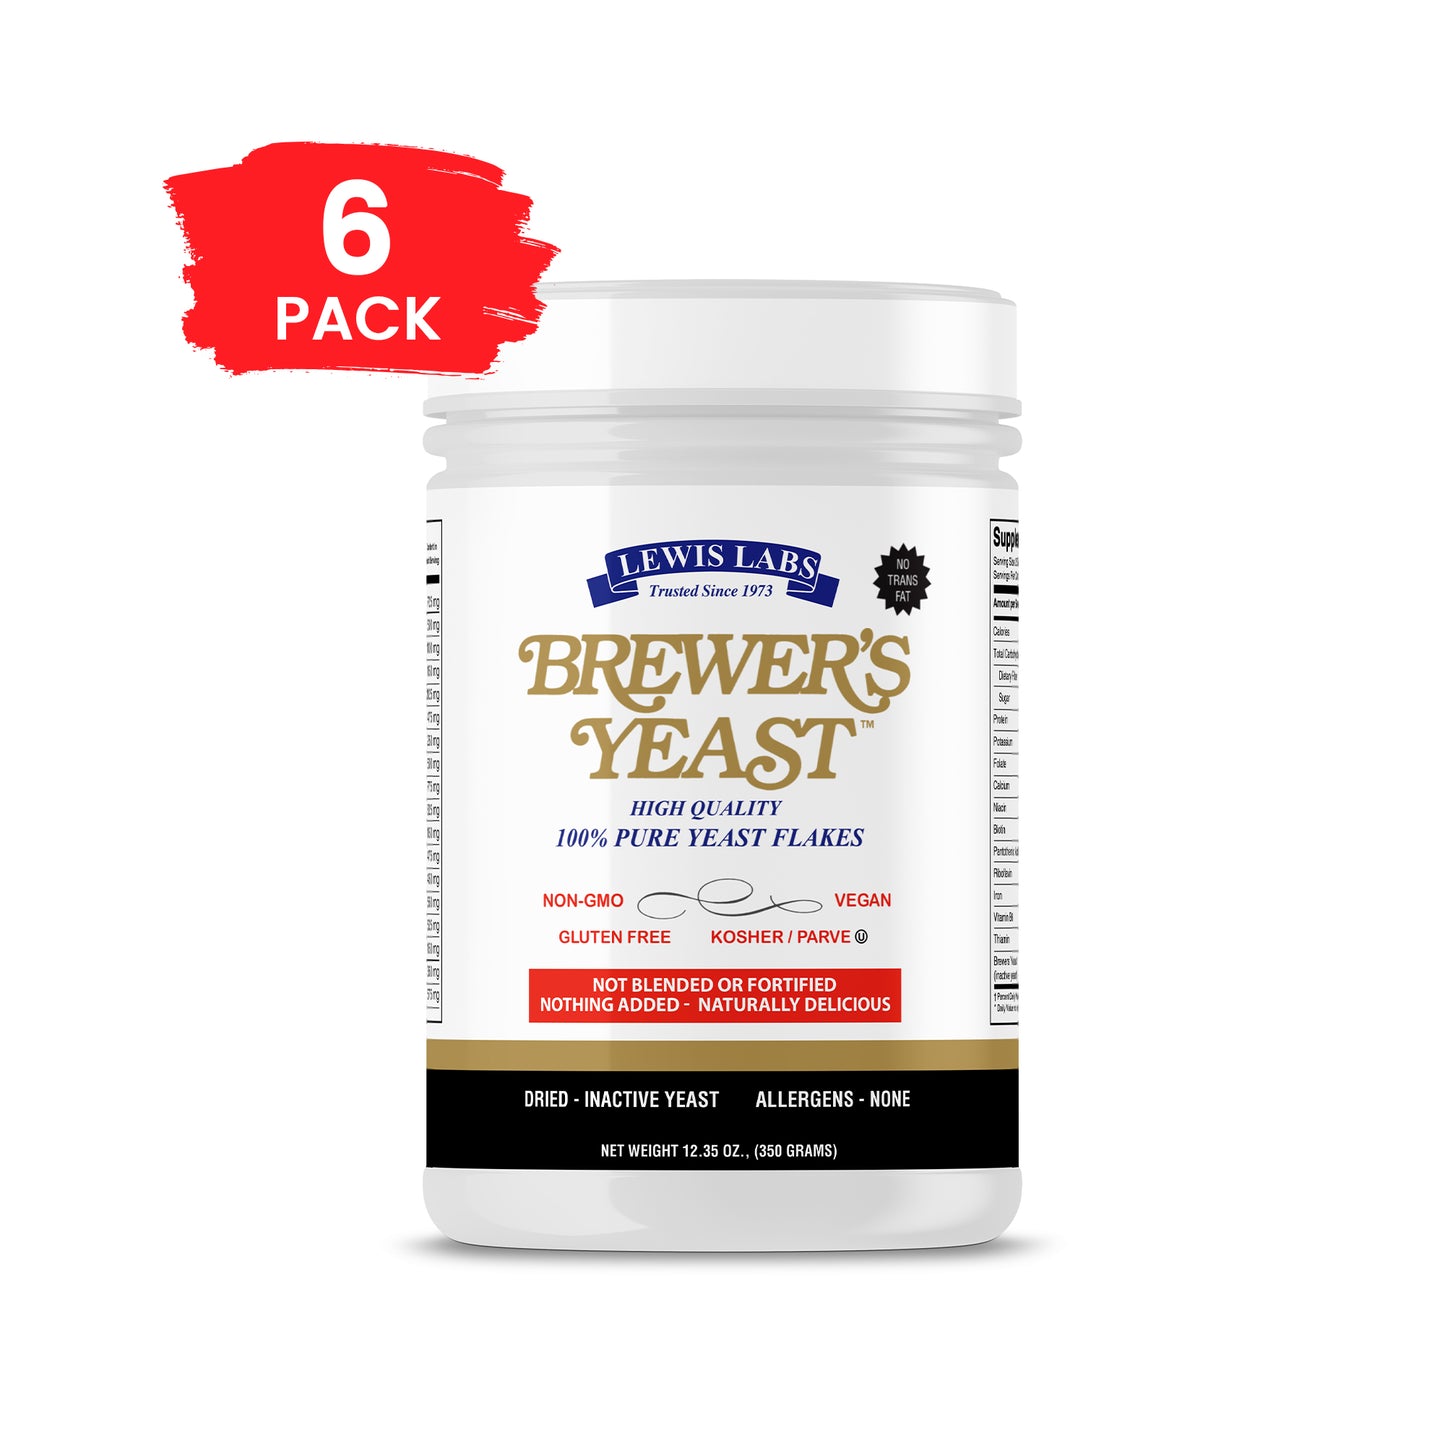 SPECIAL - 6 BOTTLES Lewis Labs Brewer's Yeast™ Flakes